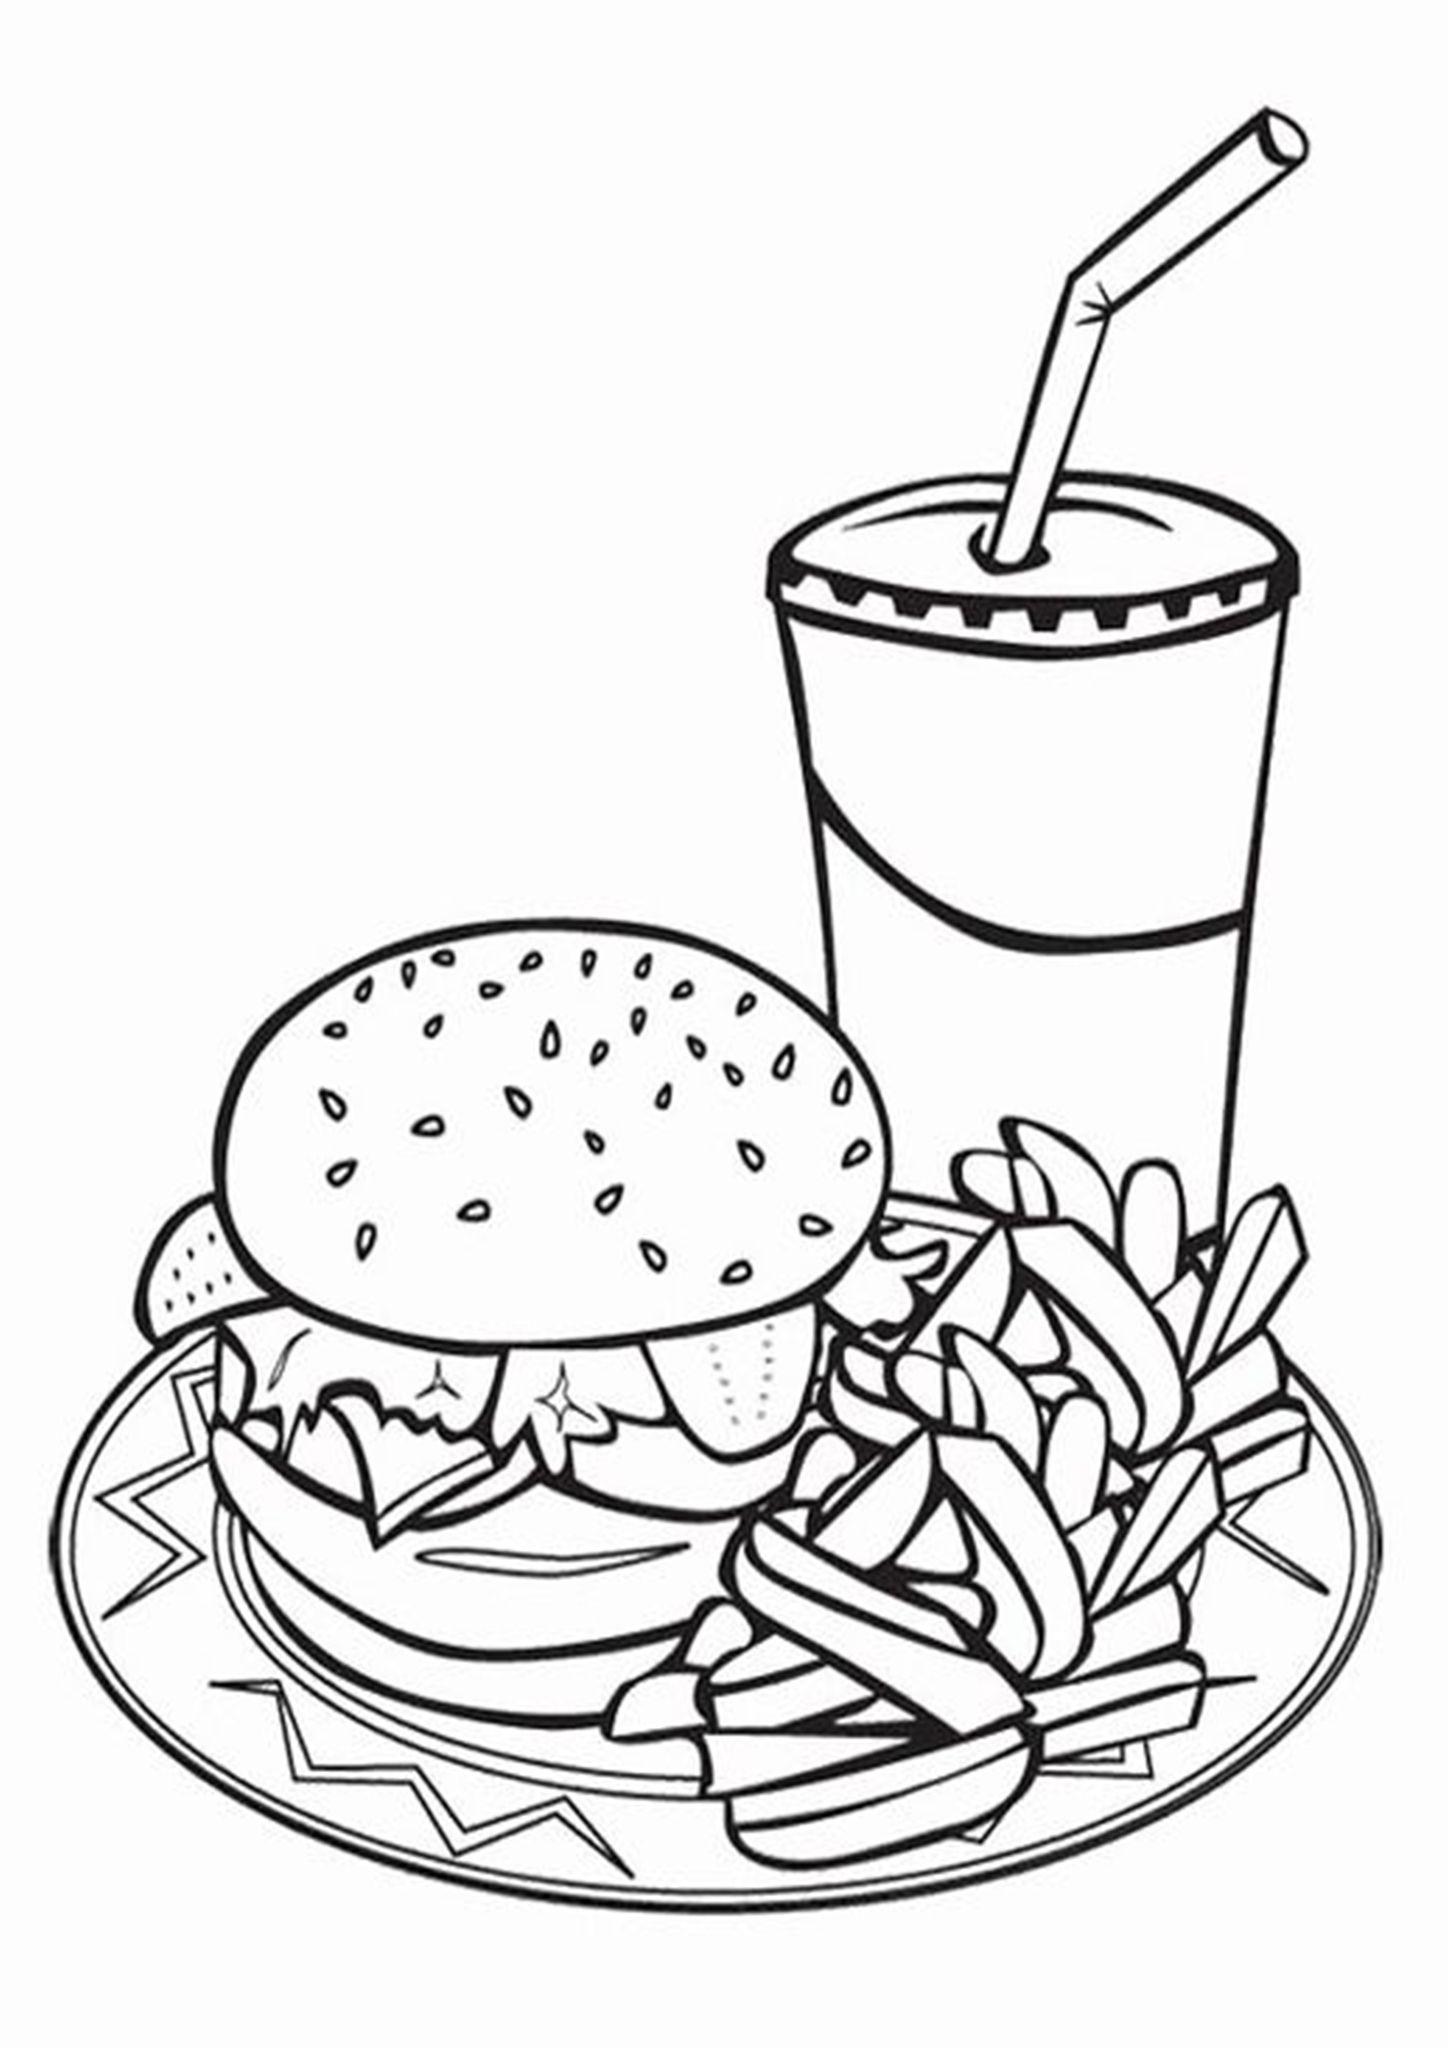 junk food coloring pages